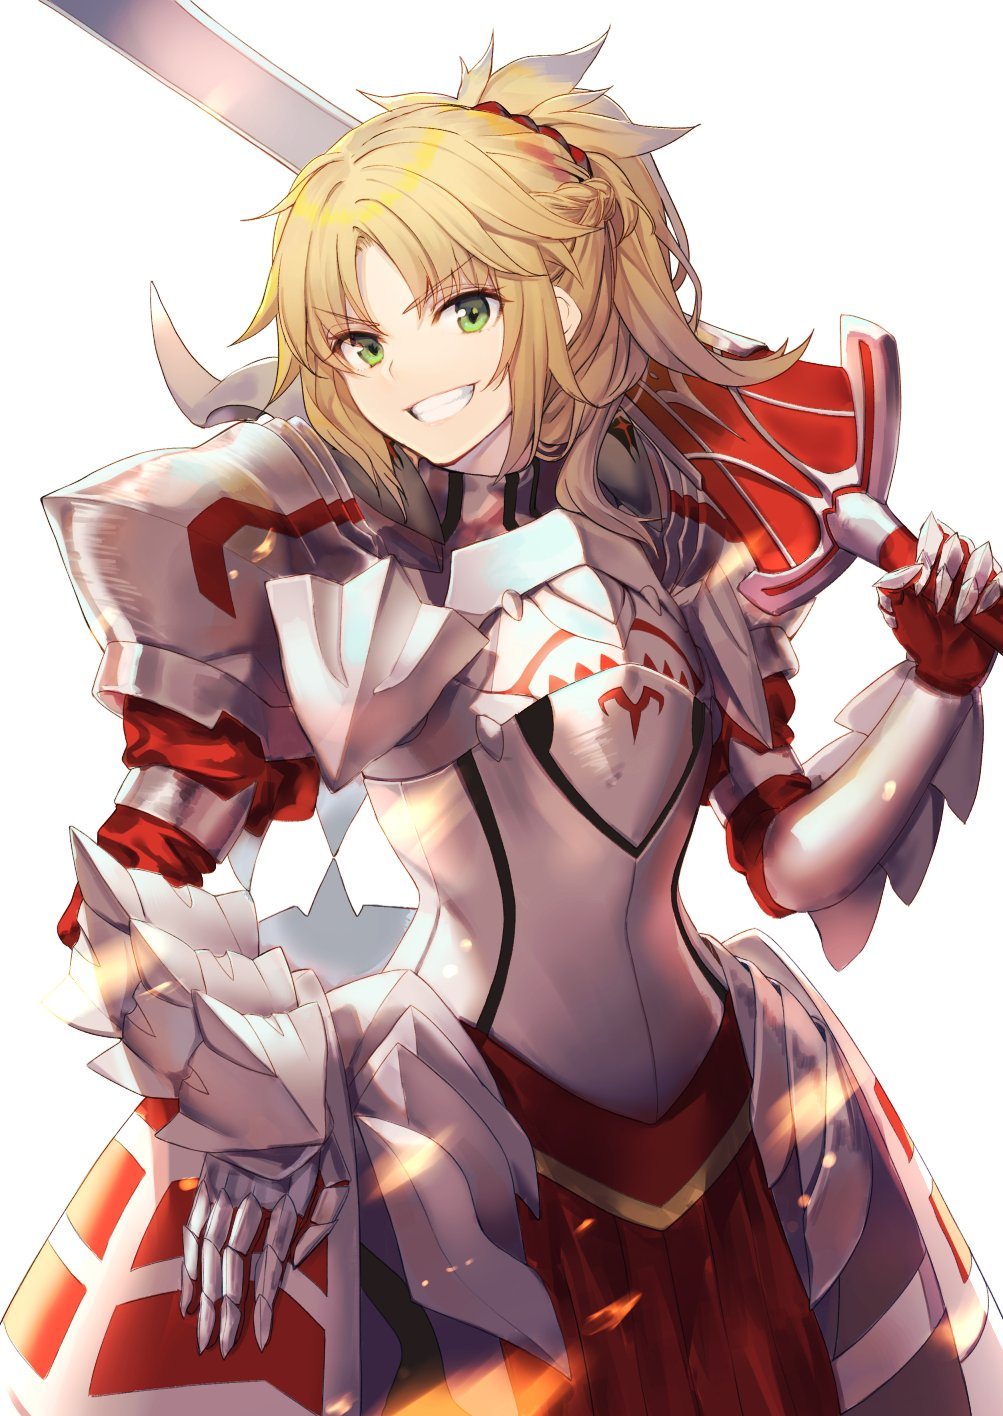 The Popular Fate Anime Series – Fan Favorite Characters and